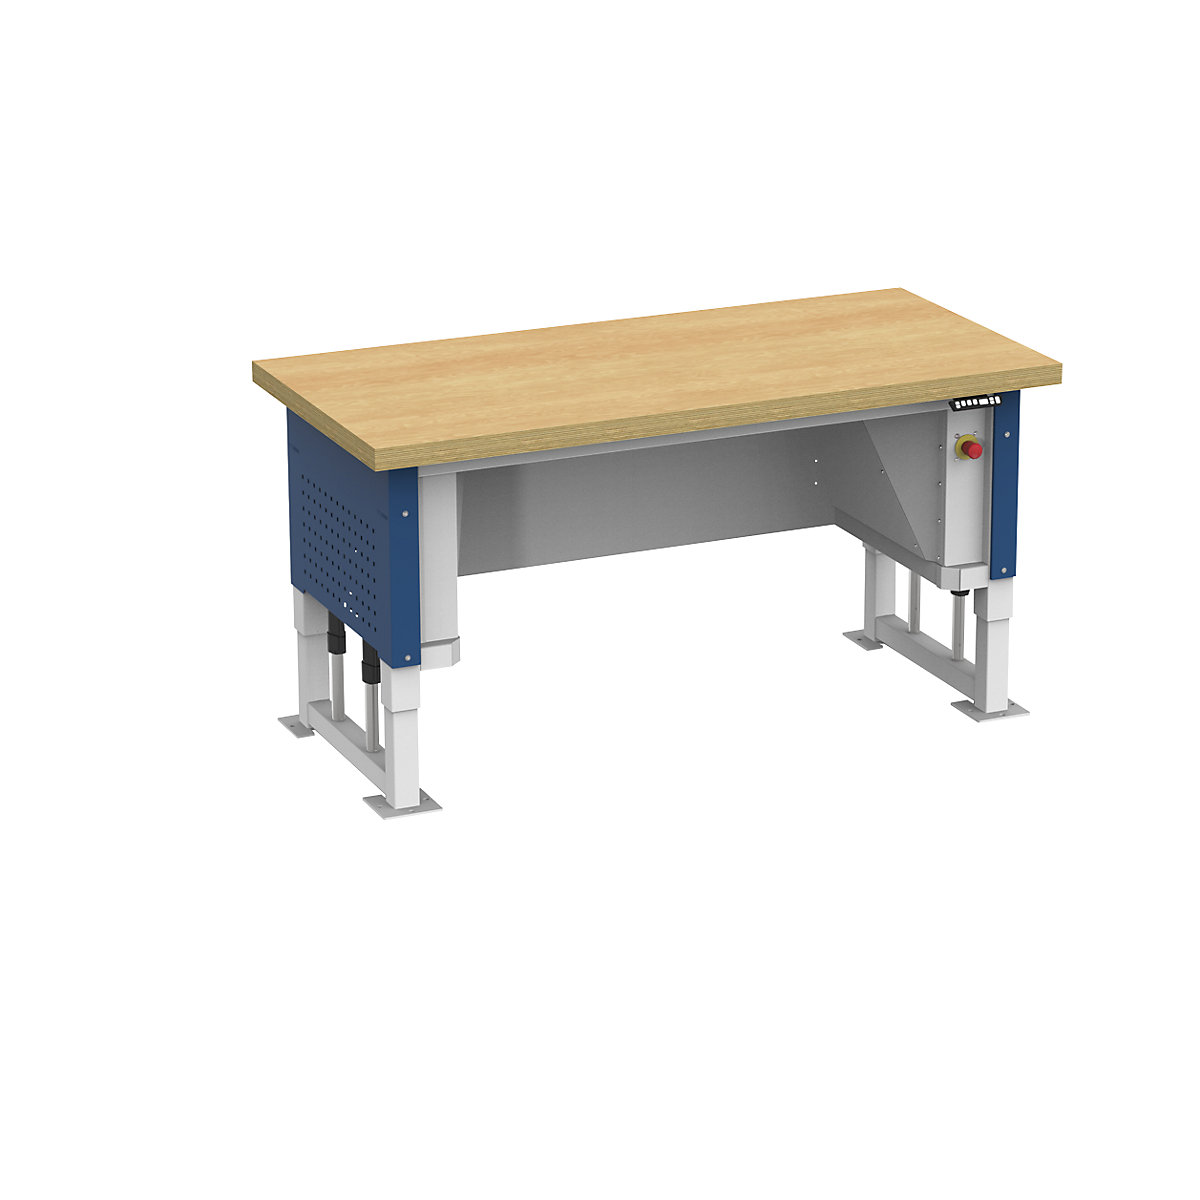 Heavy duty table, electrically height adjustable, worktop width 1685 mm, max. surface load 1000 kg, gentian blue RAL 5010-1